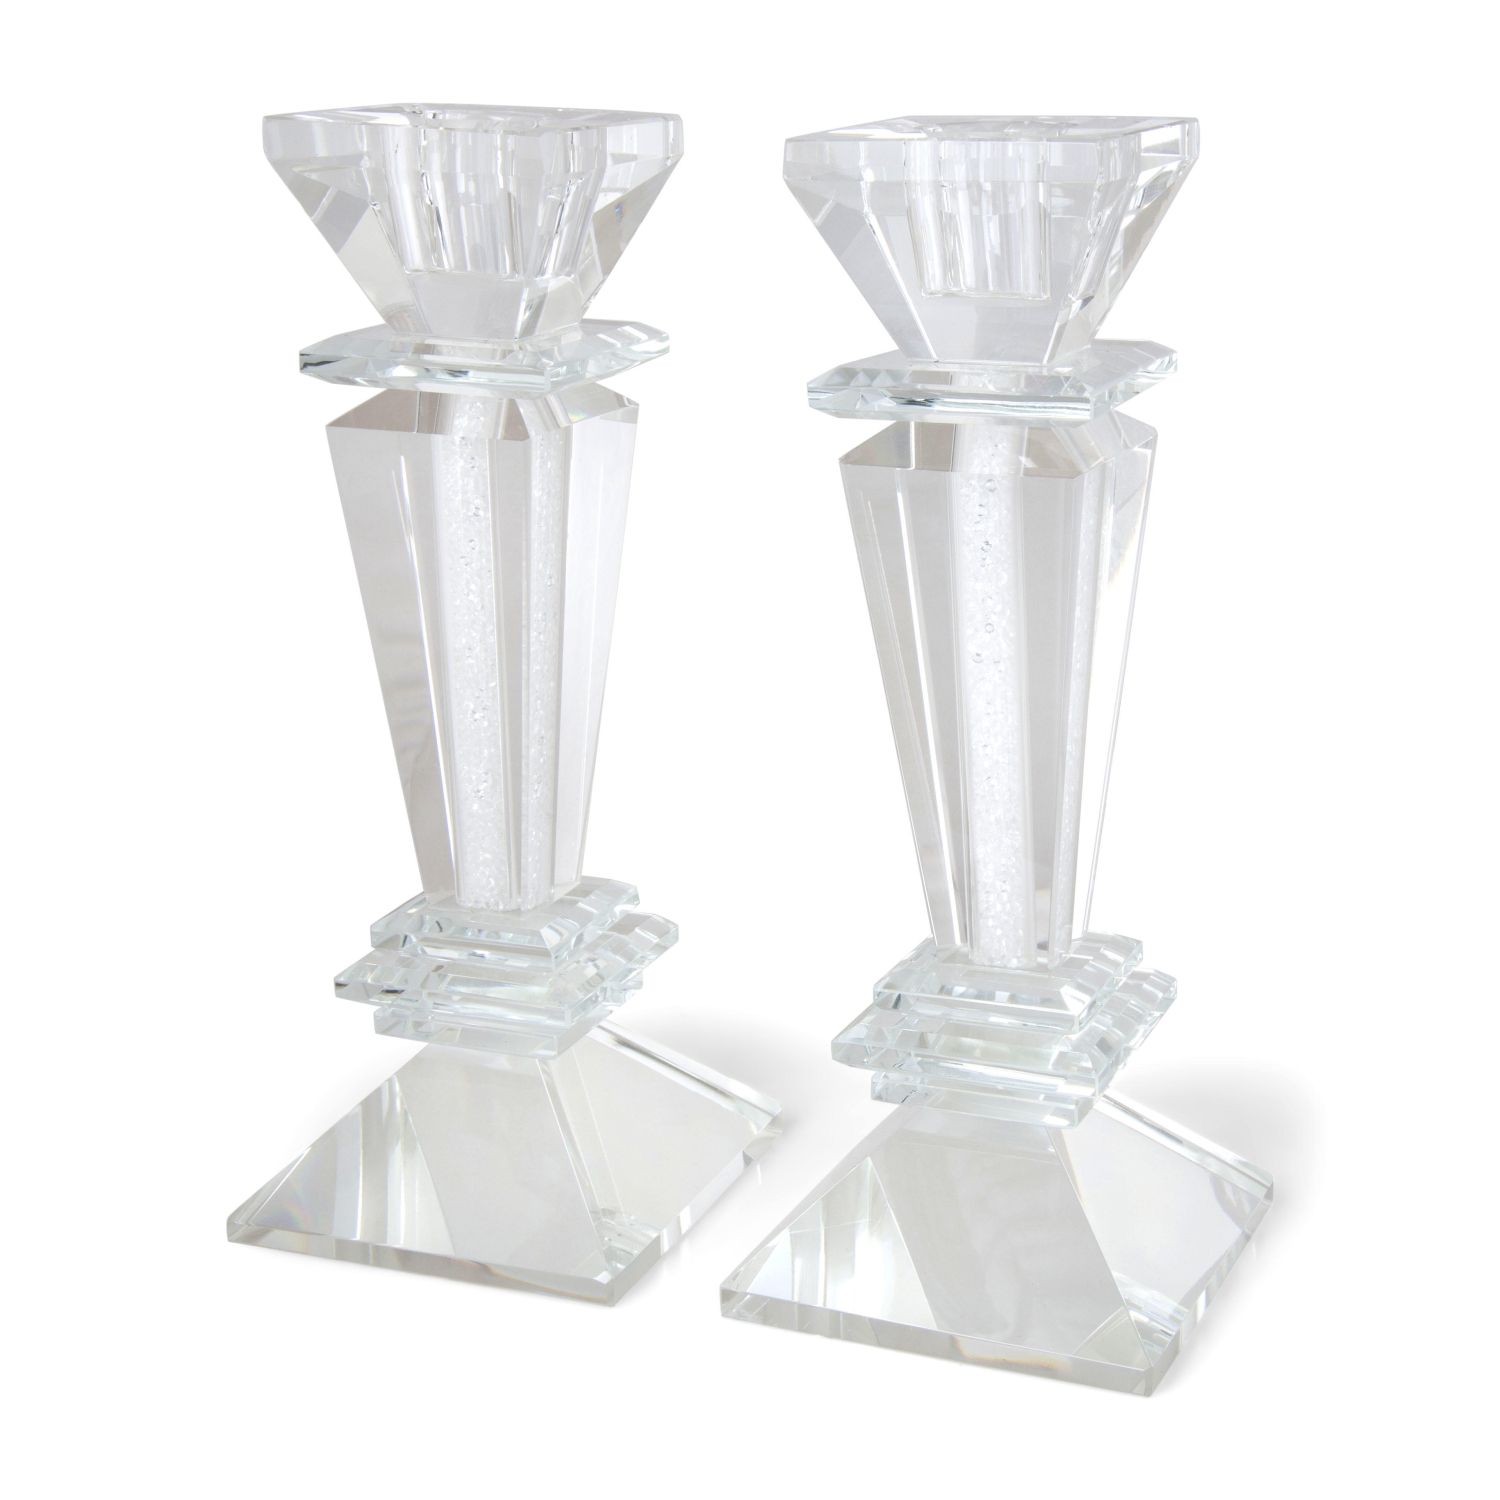 Deluxe Pyramid Crystal Candlesticks with Rhinestones - 1